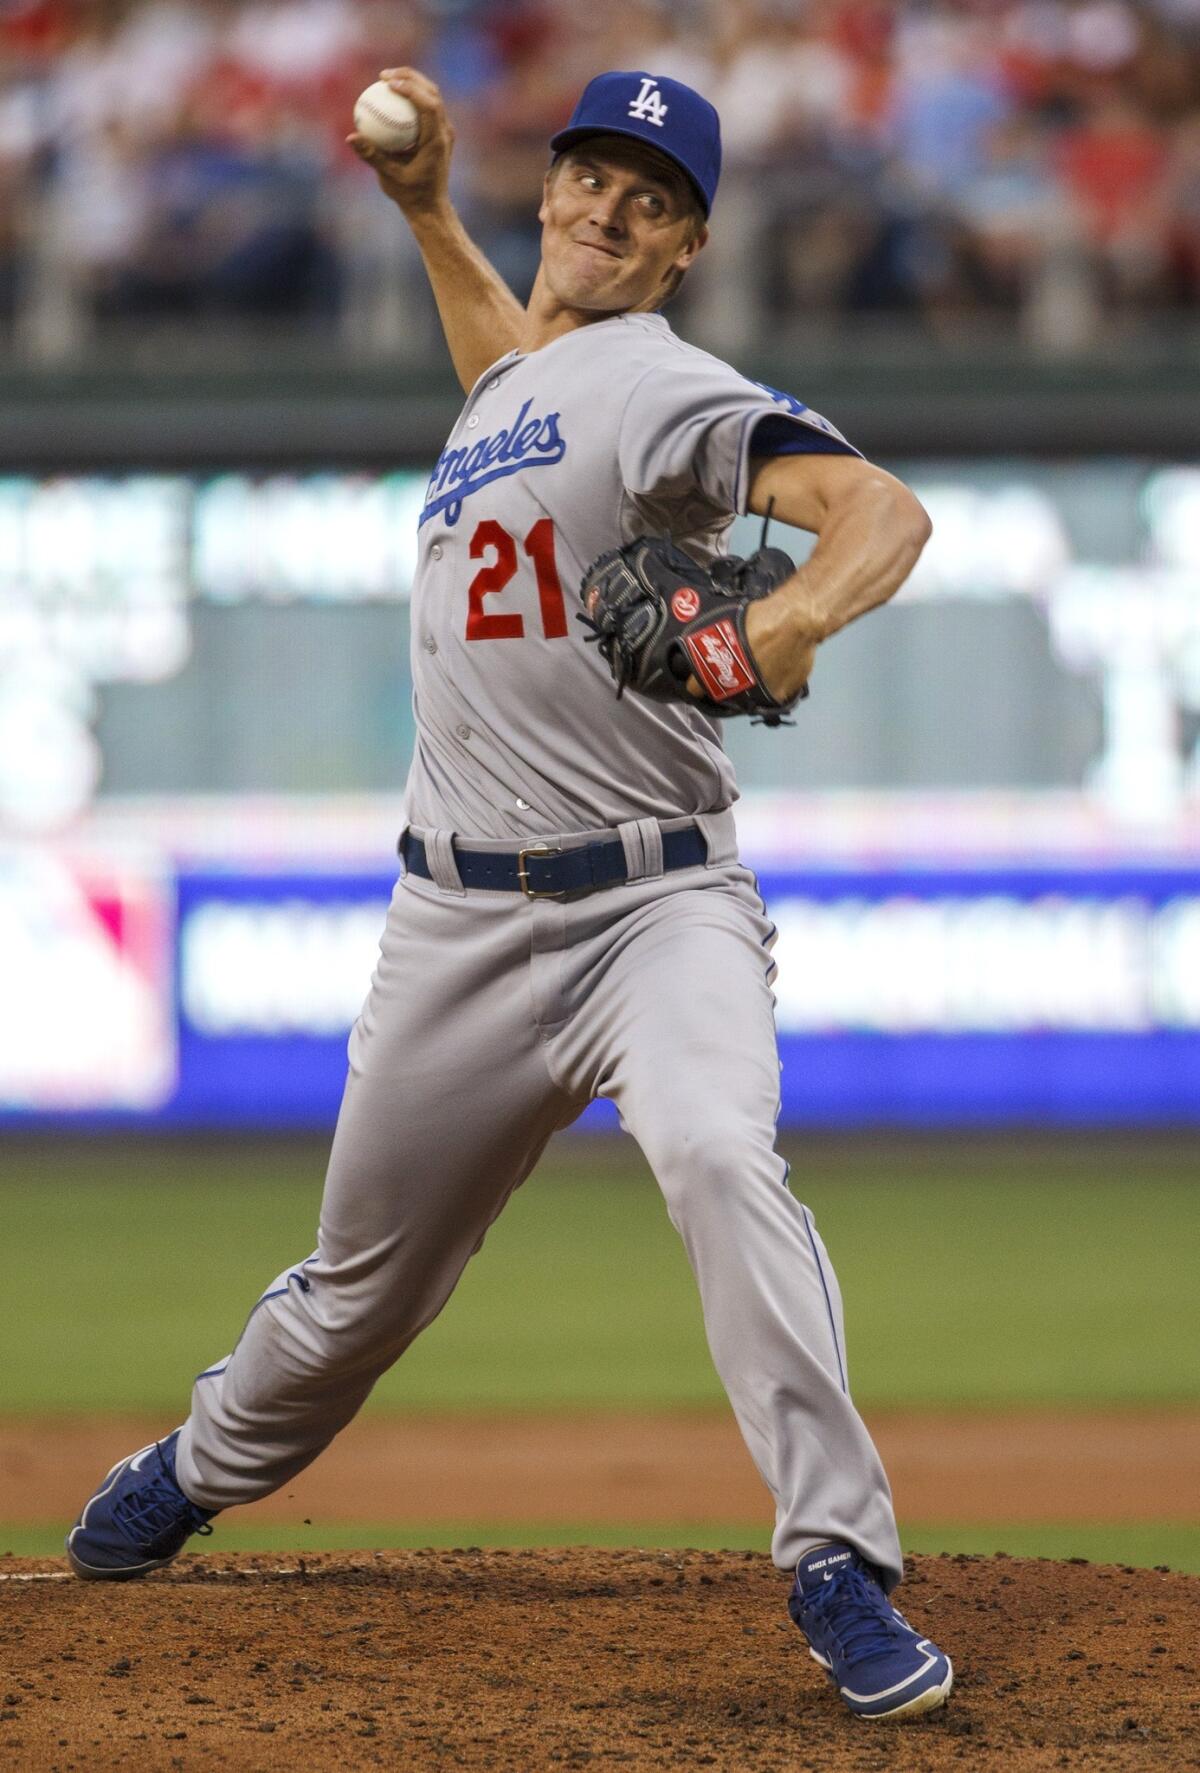 Dodgers starting pitcher Zack Greinke gave up only three hits and walked four in 7 1/3 innings against the Phillies on Friday.